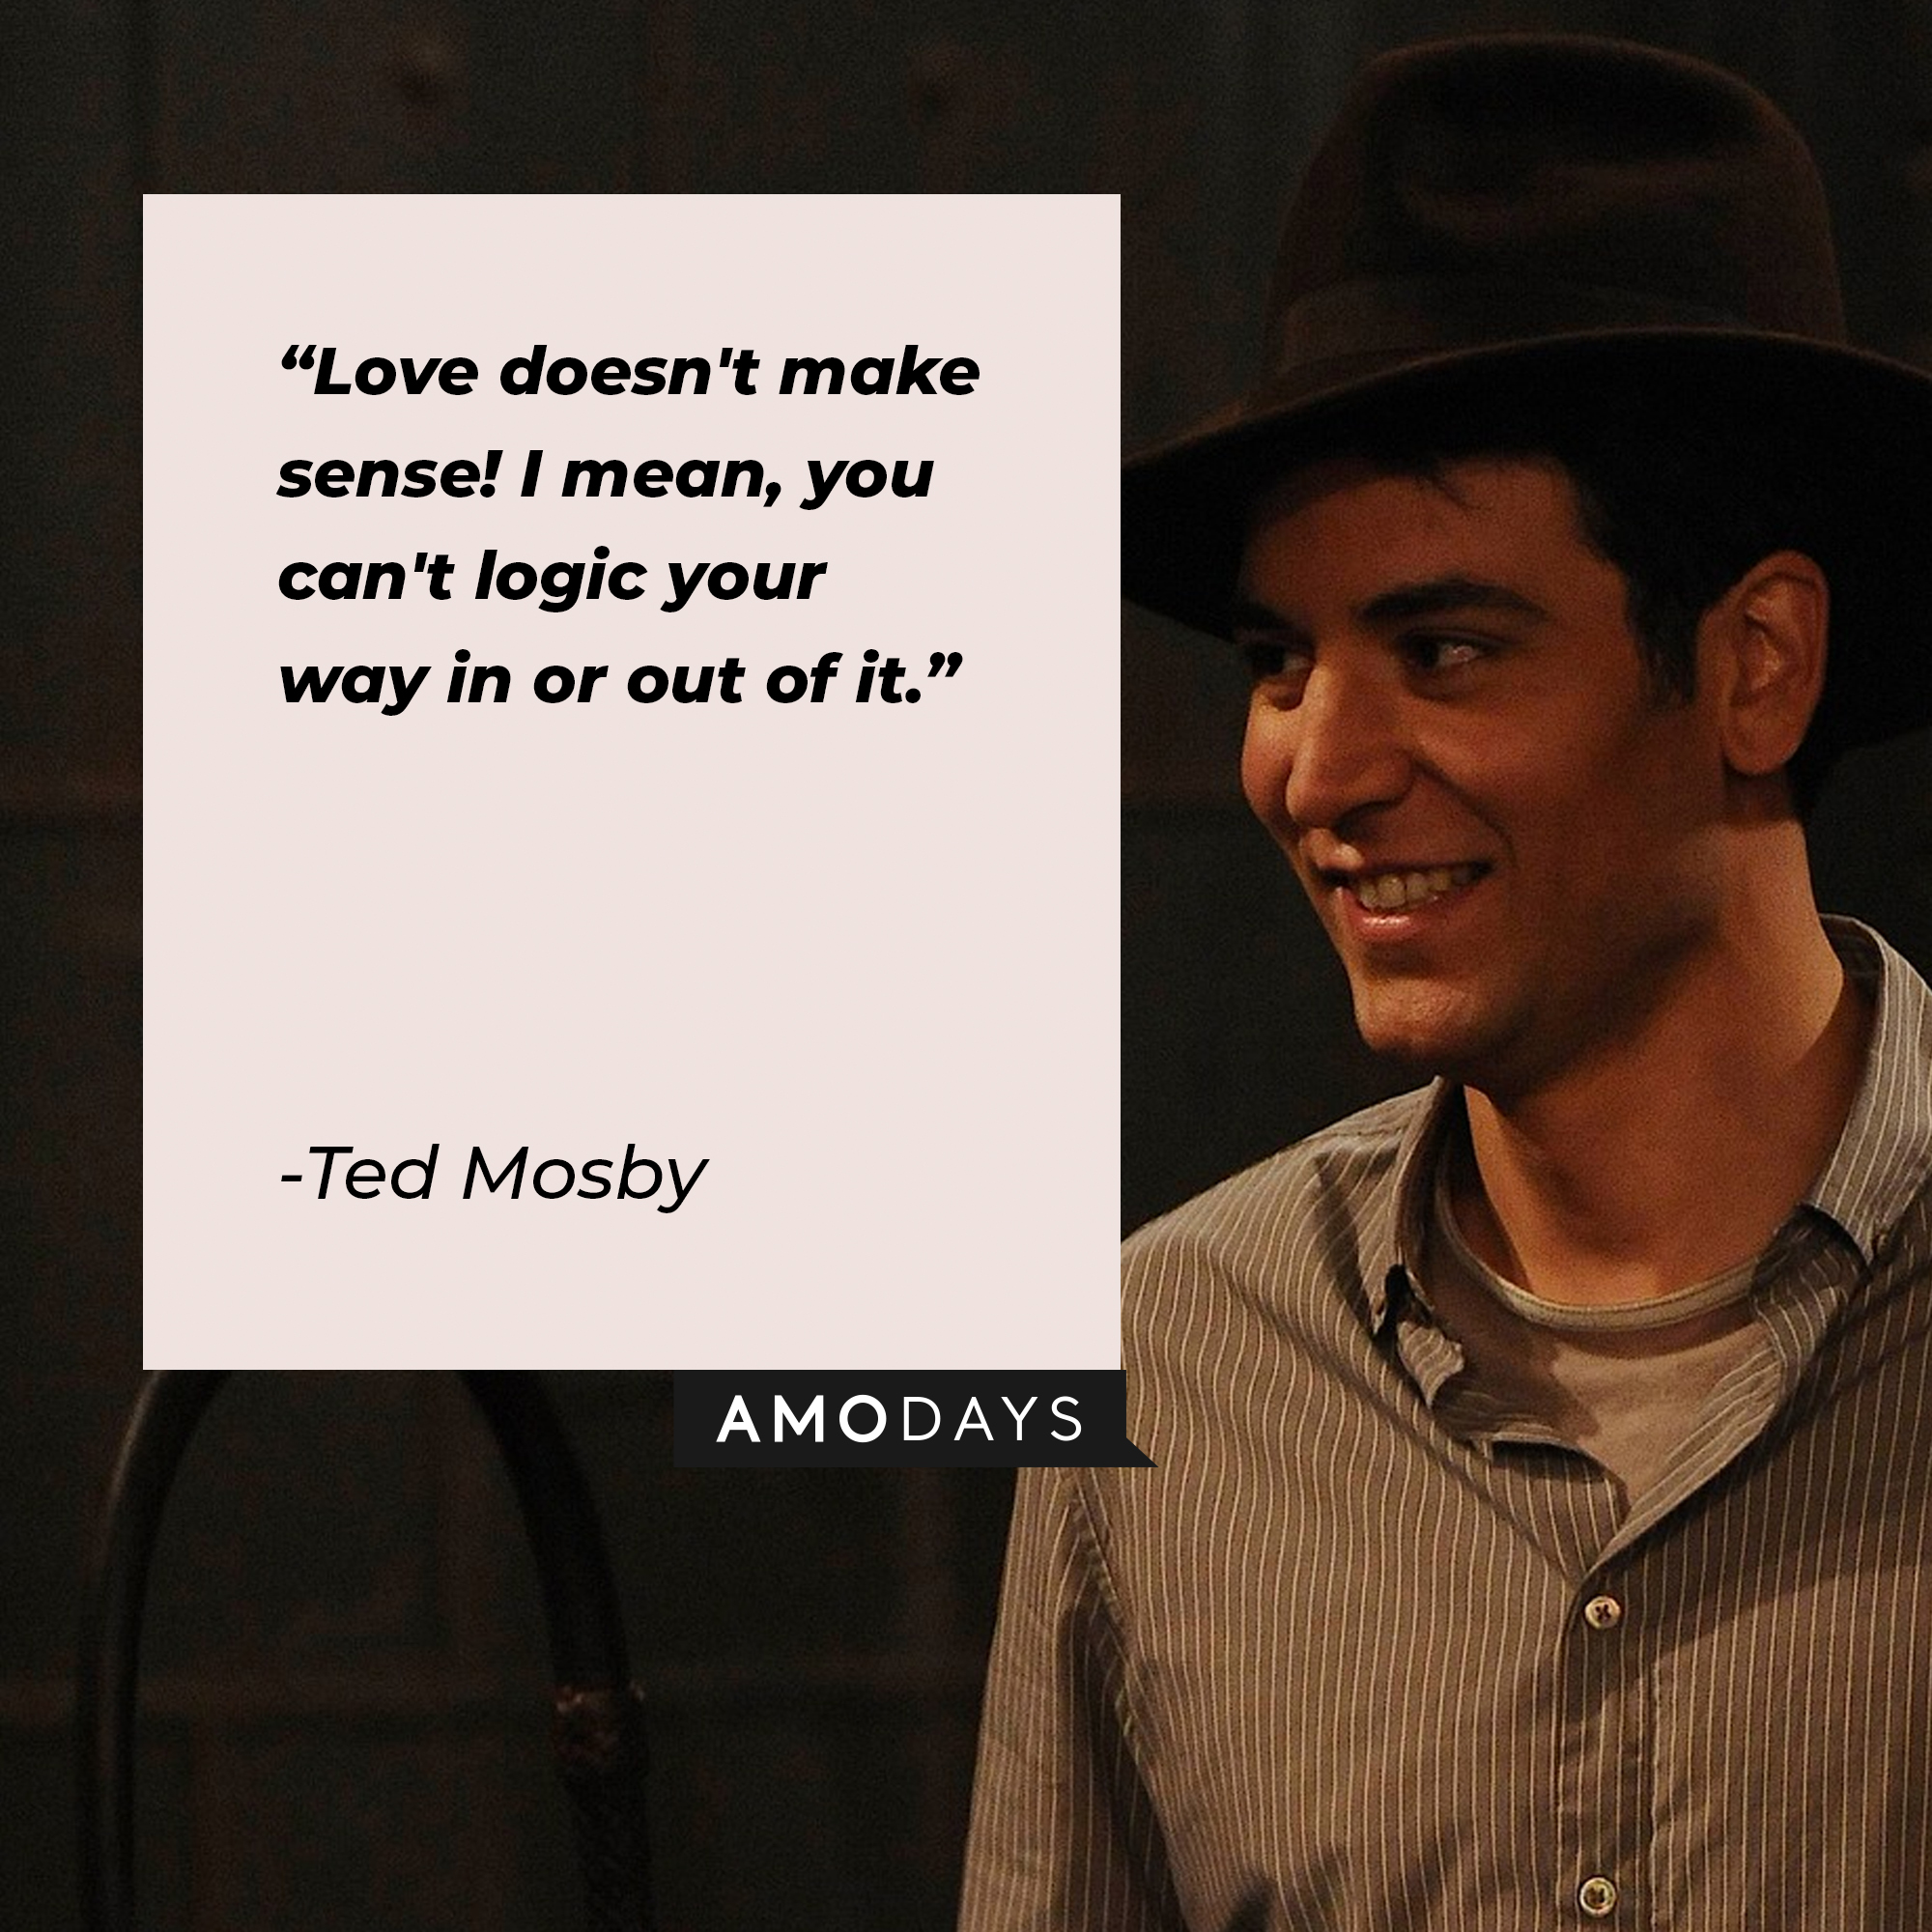 A picture of Ted Mosby with his quote, “Love doesn’t make sense. You can’t logic your way into or out of it.” | Source: facebook.com/OfficialHowIMetYourMother